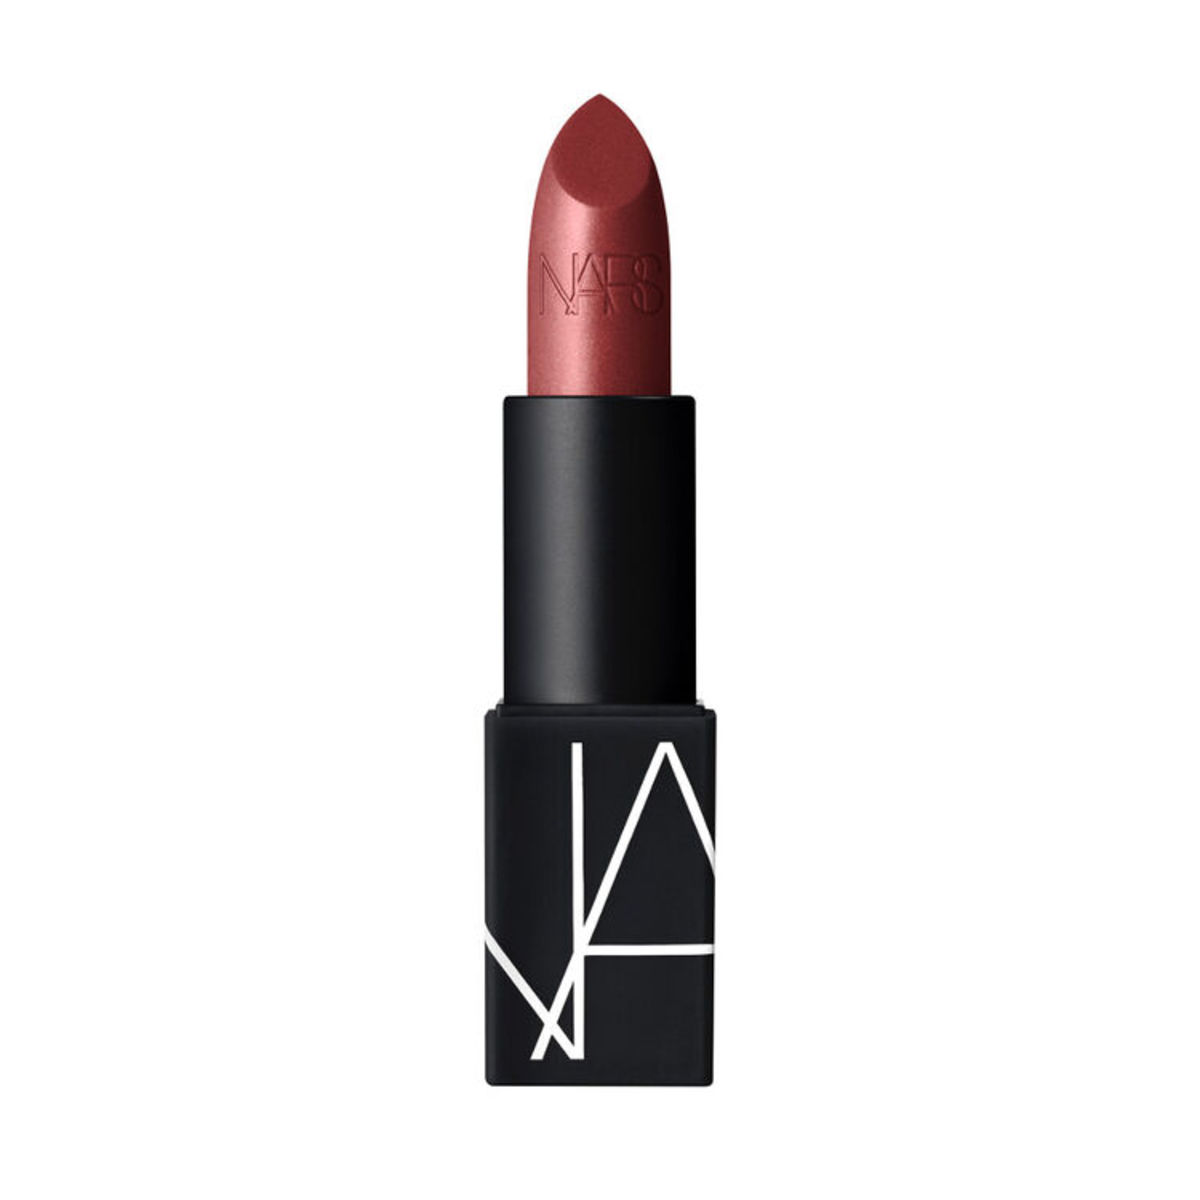 Nars Satin Lipstick in Dressed to Kill, $26, available here. Photo: Courtesy of Nars